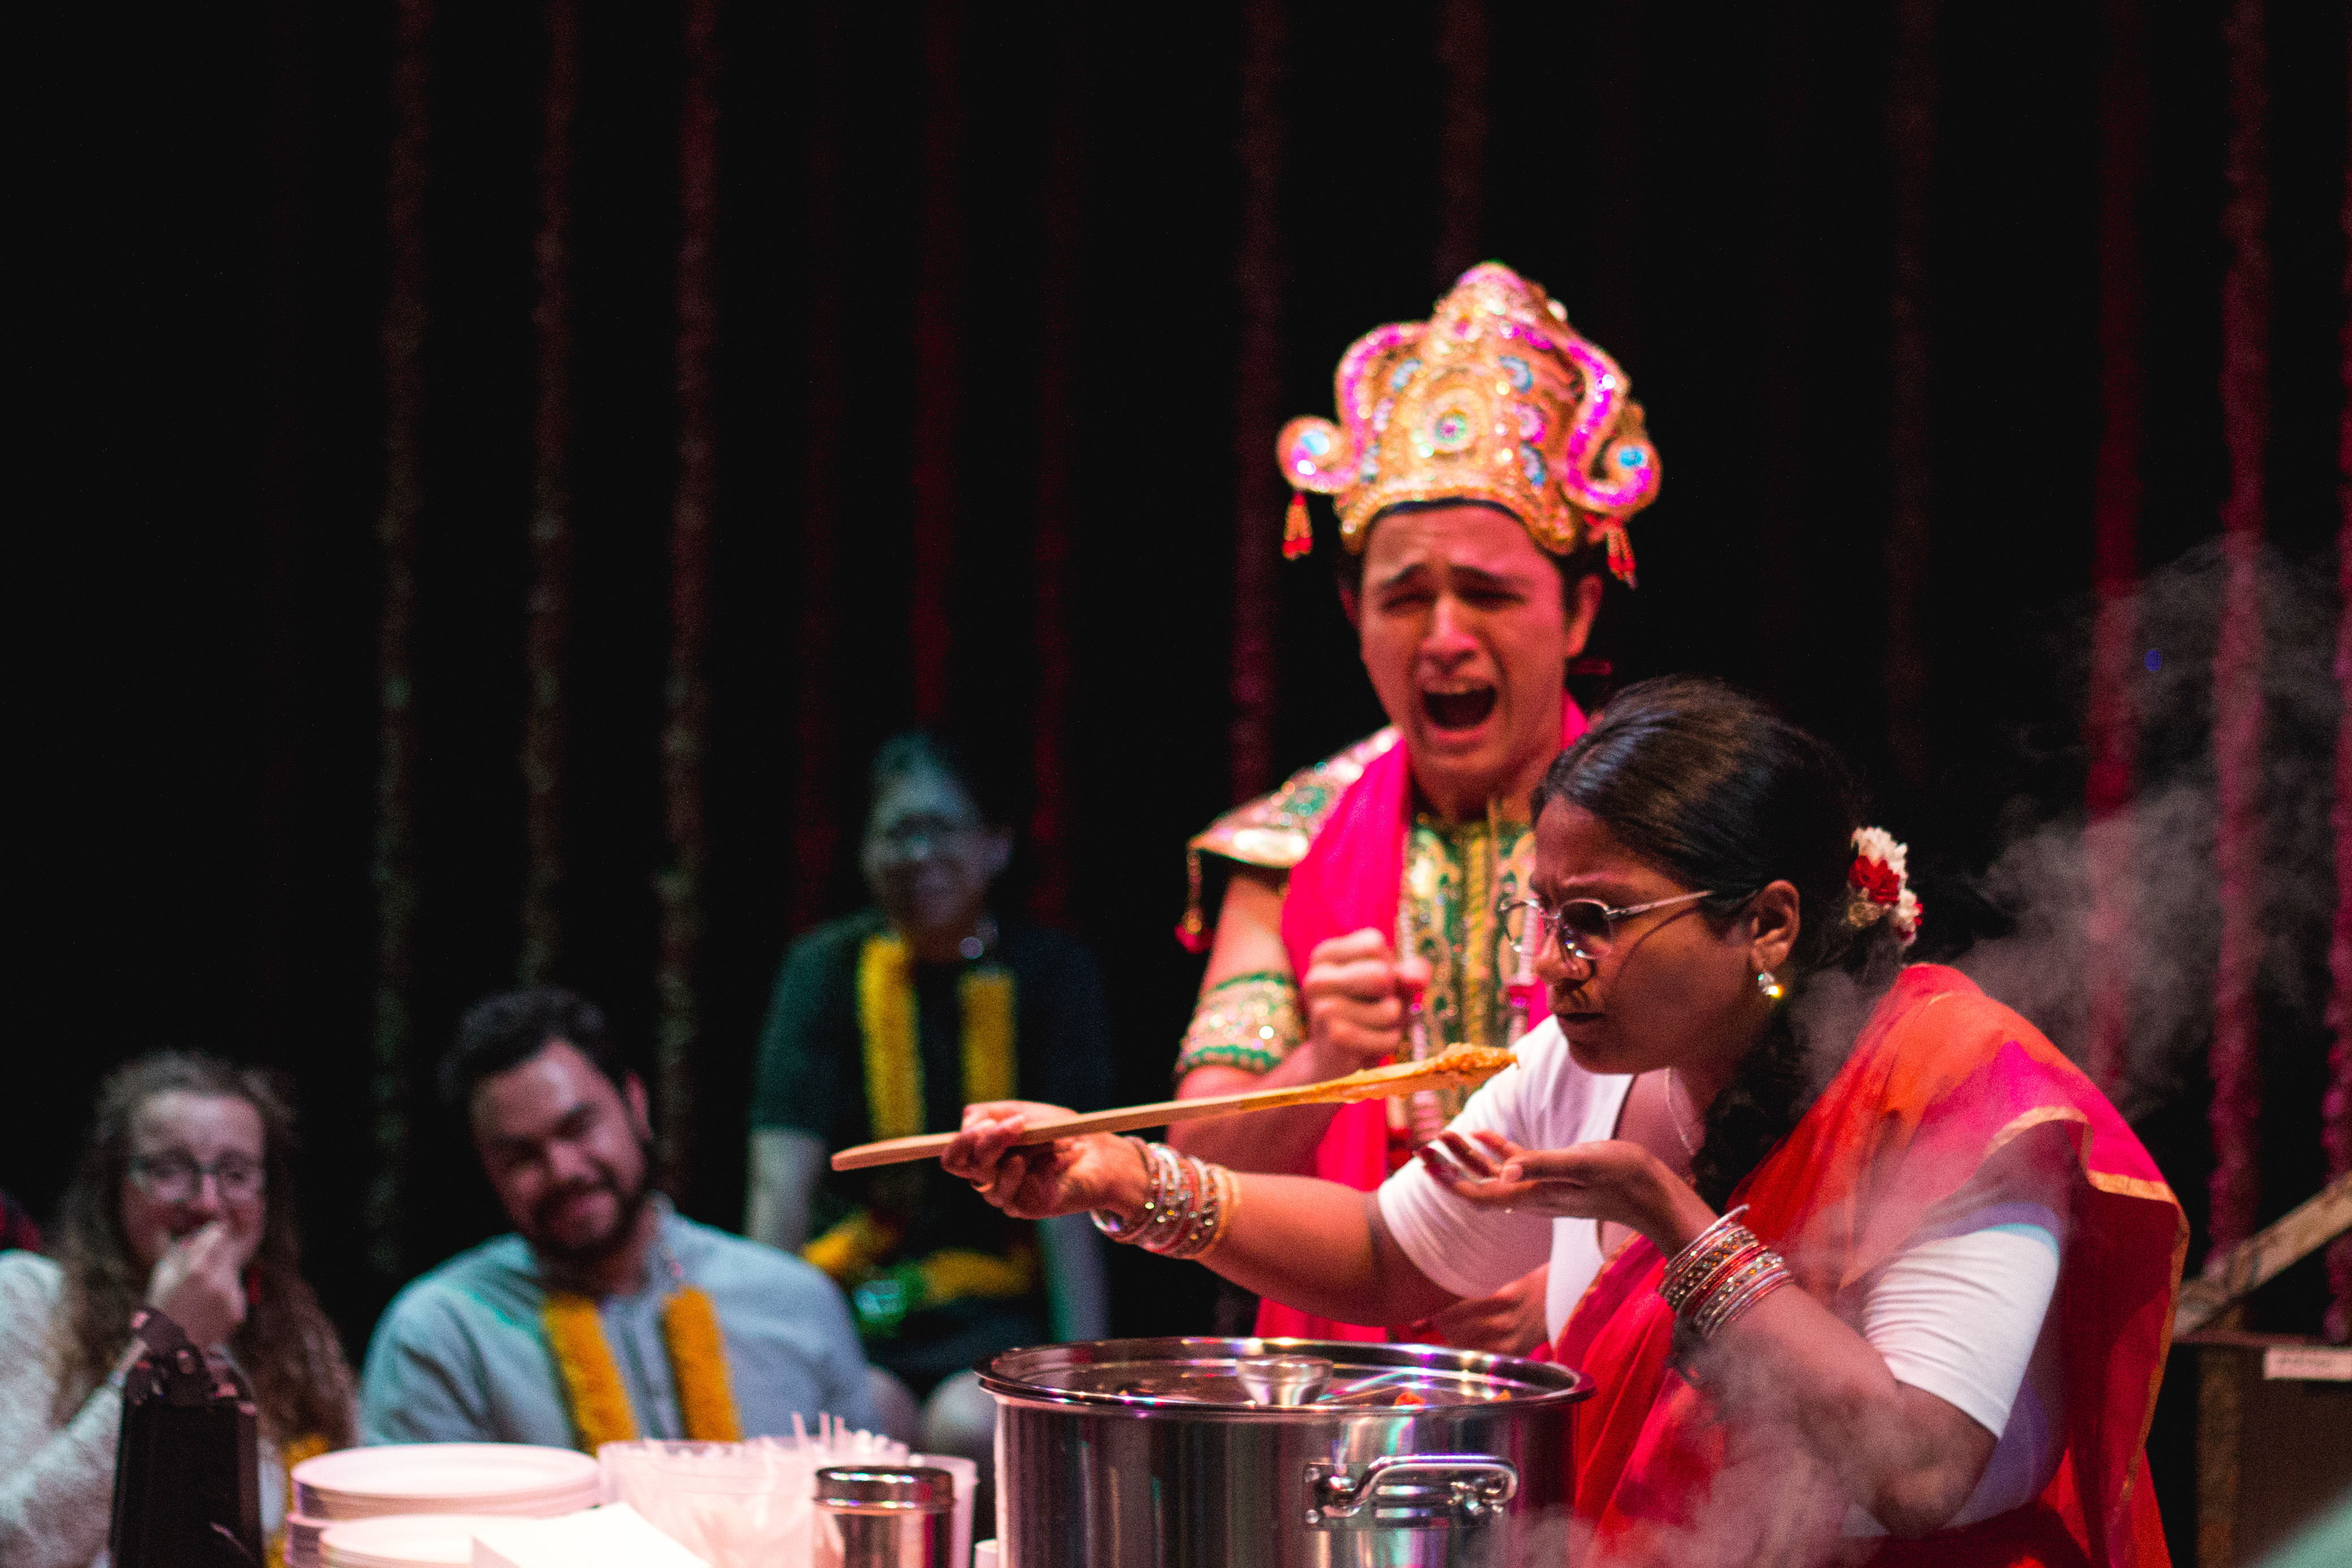 'Mrs. Krishnan's Party' provides food for the party-starved soul. (Photo: courtesy of Indian Ink Theater Company)